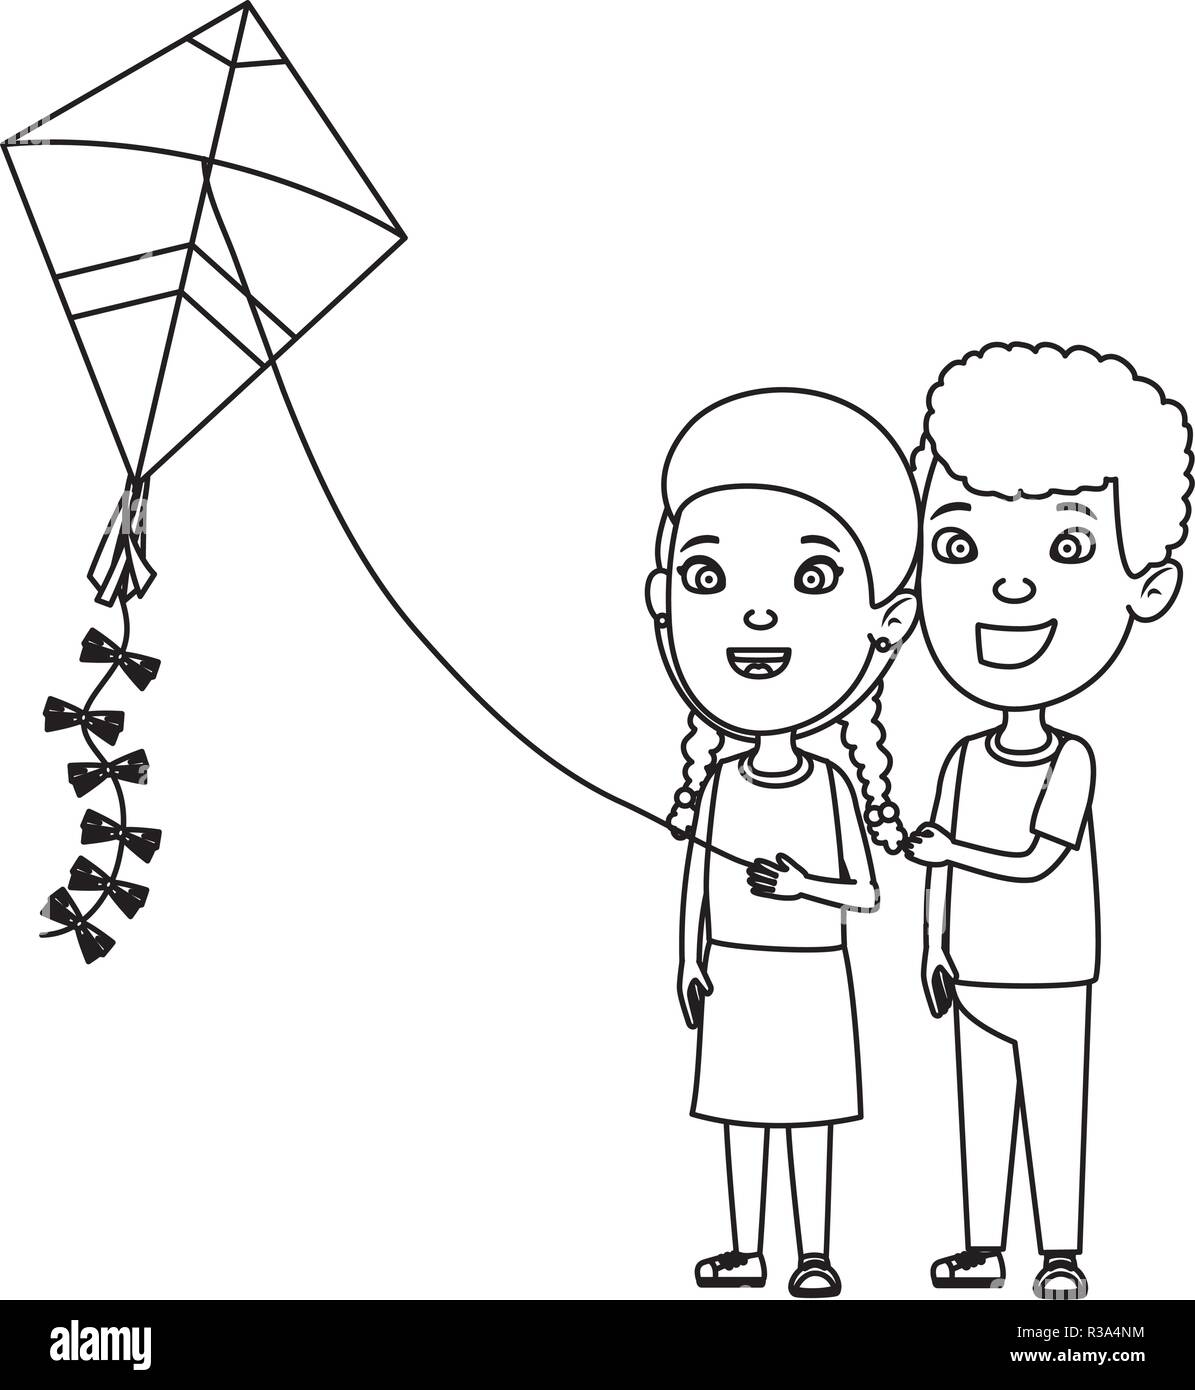 Kite Flying Coloring Pages  Get Coloring Pages